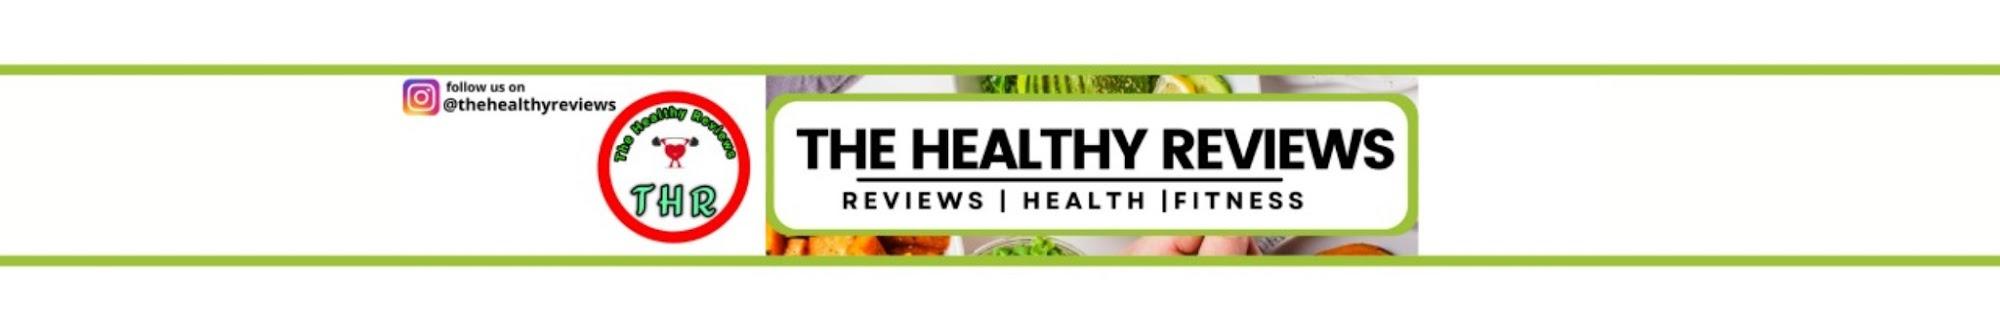 The Healthy Reviews